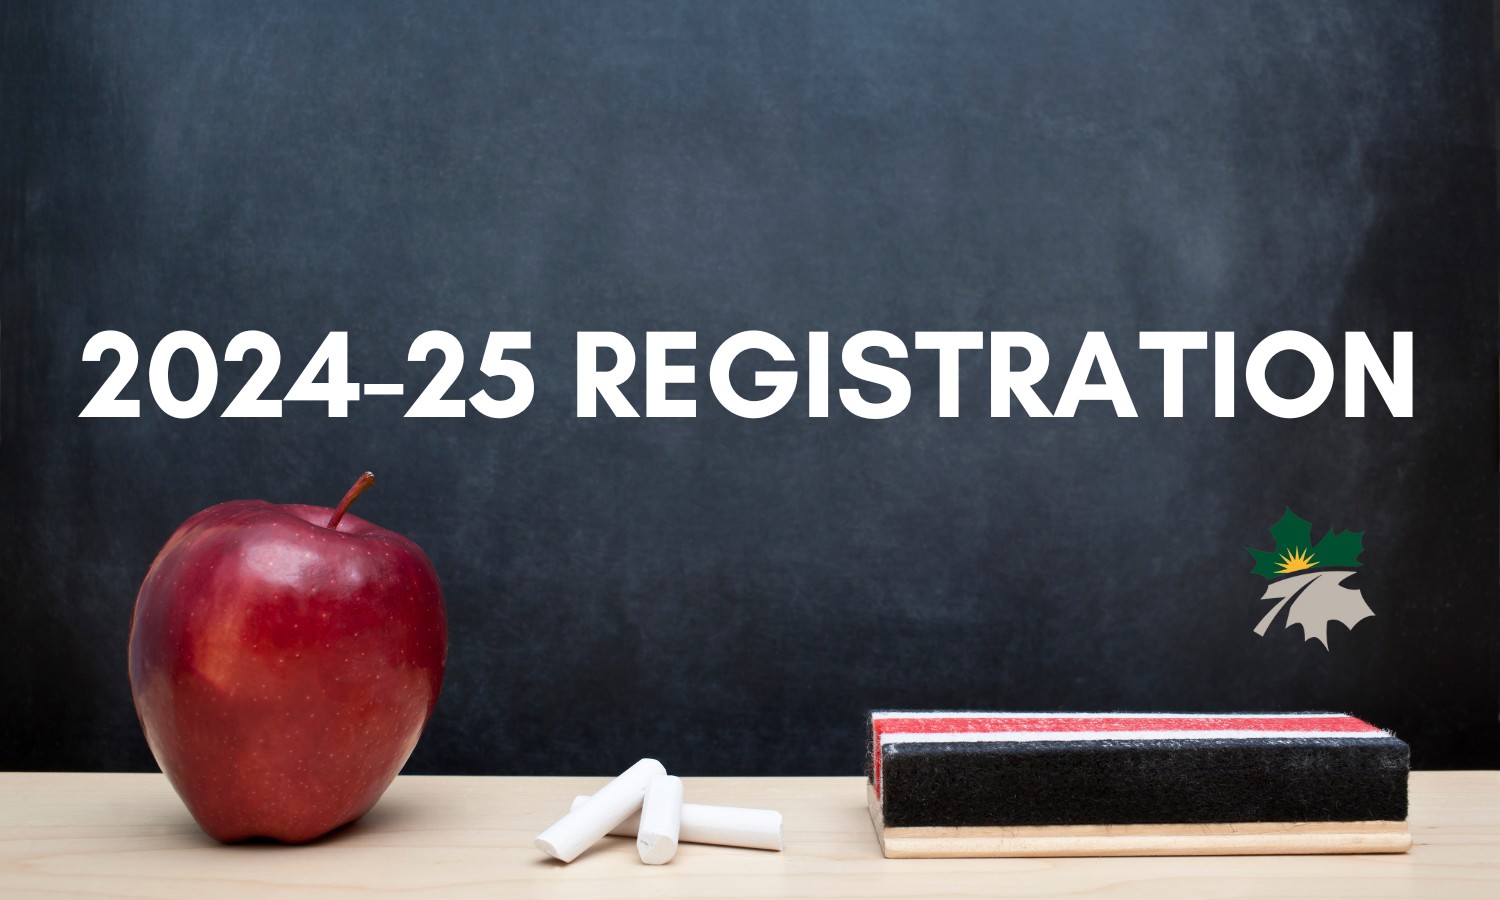 Register for the 2024-25 school year